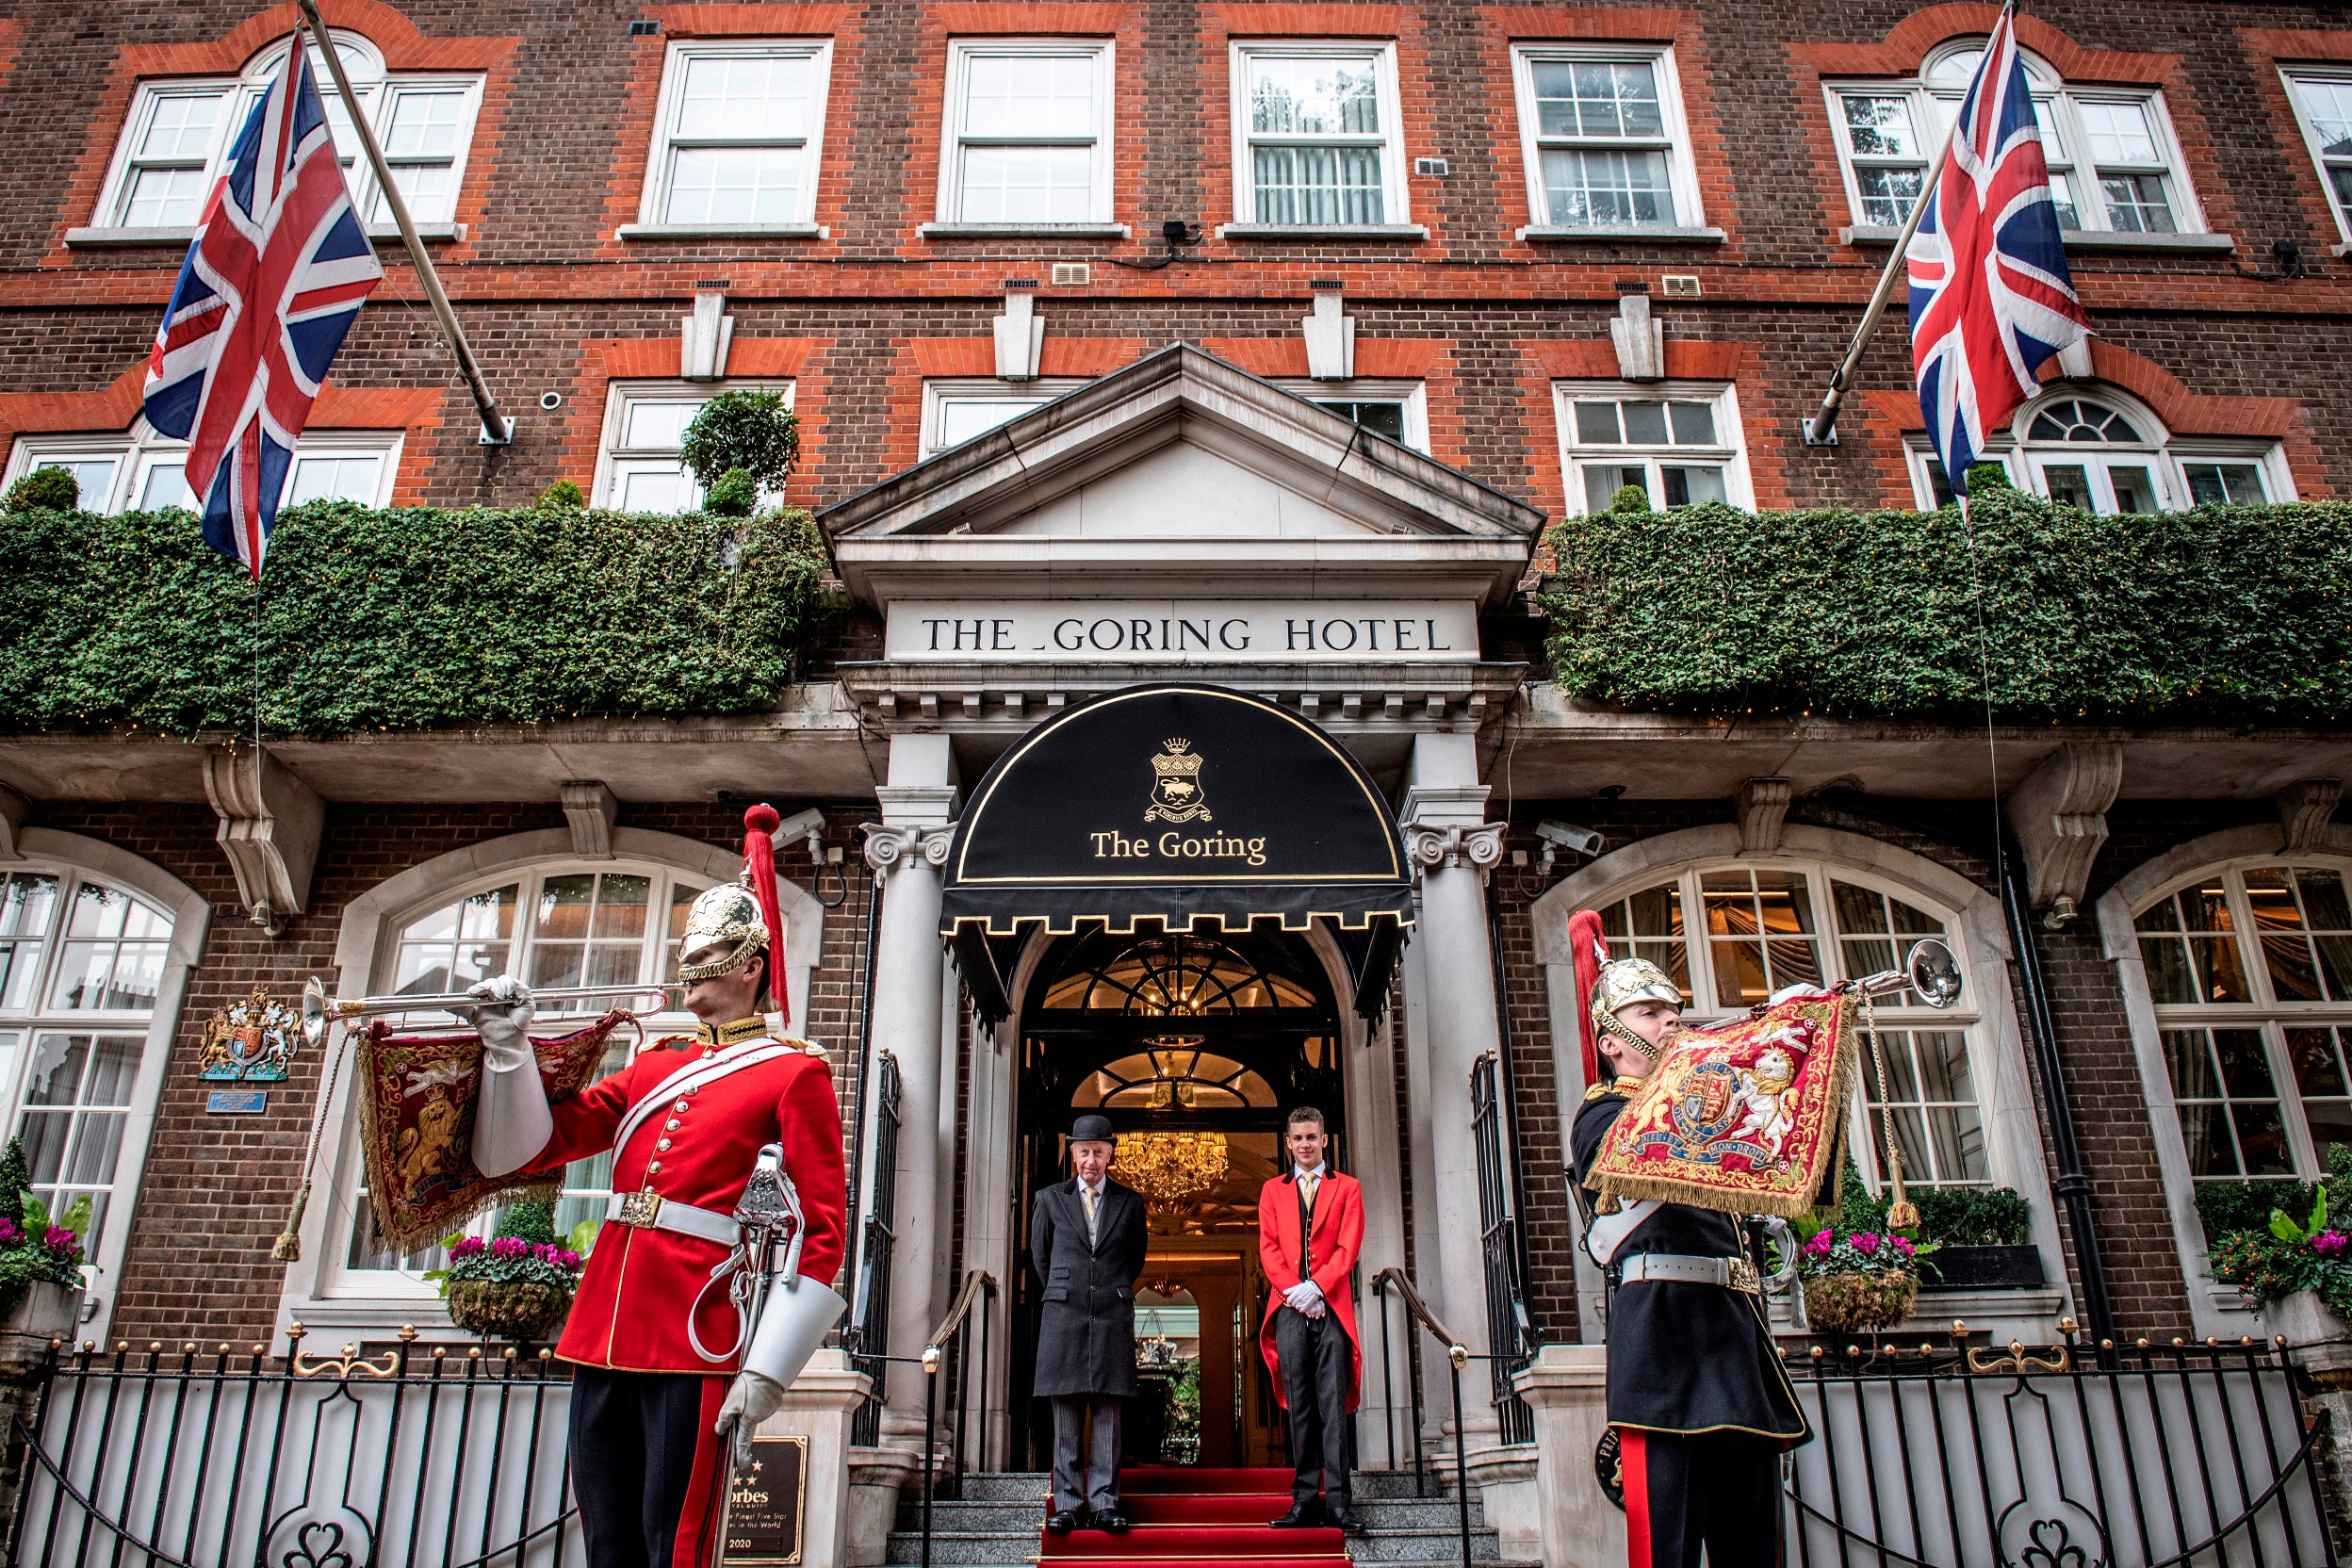 A Postcard From... Jeremy Goring | The Goring Hotel